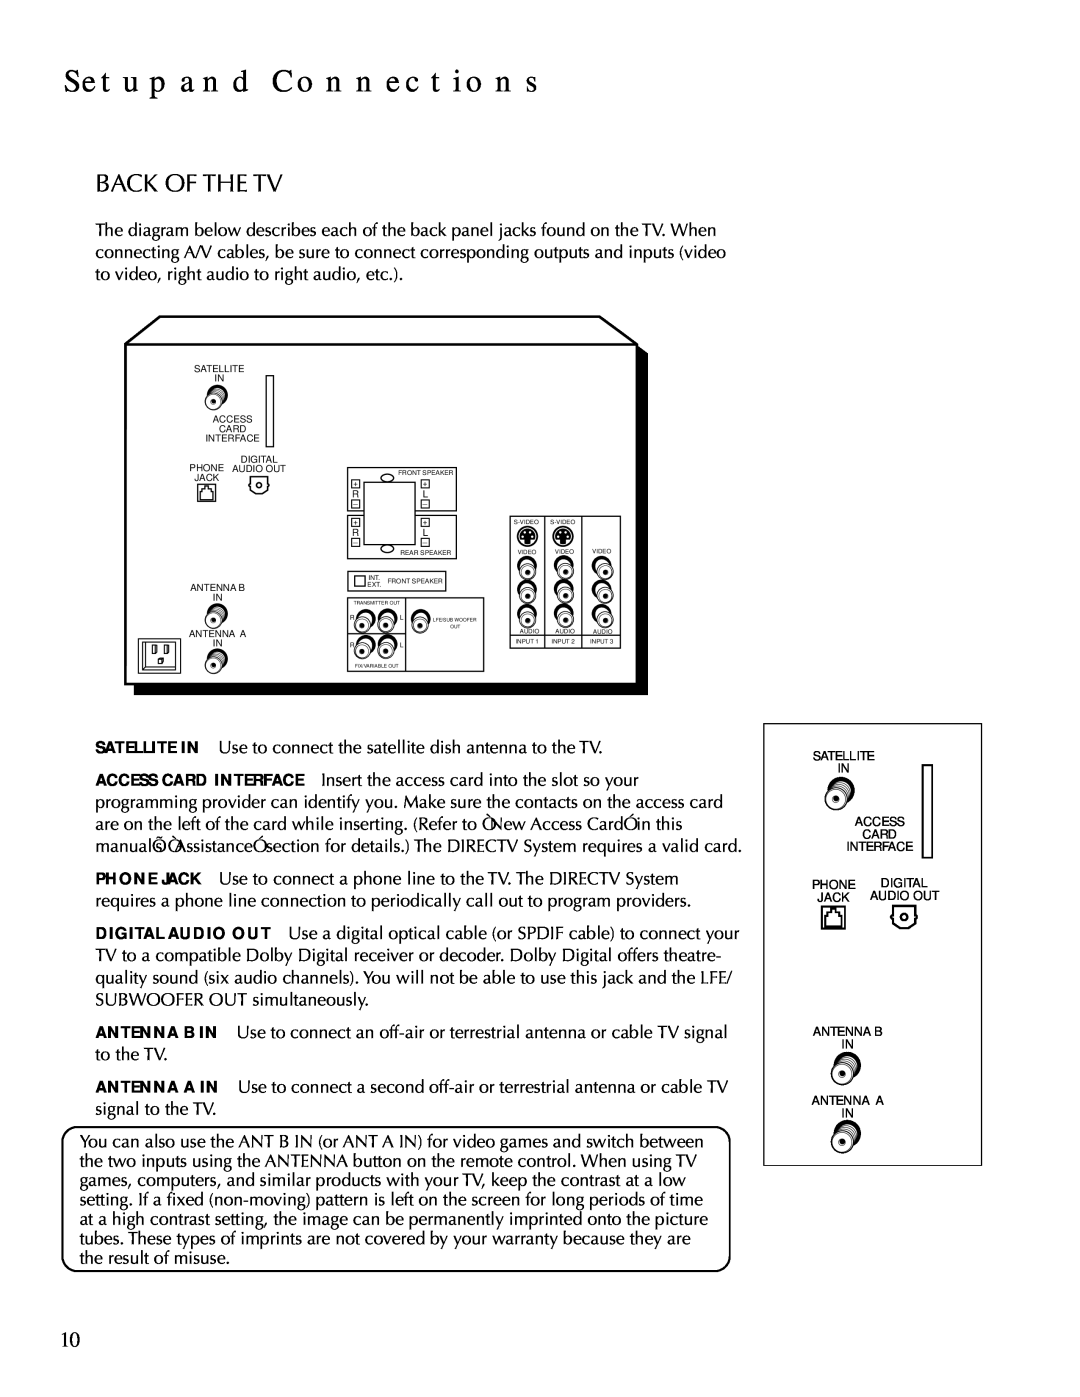 DirecTV HDTV user manual Back Of The Tv, Setup And Connections 